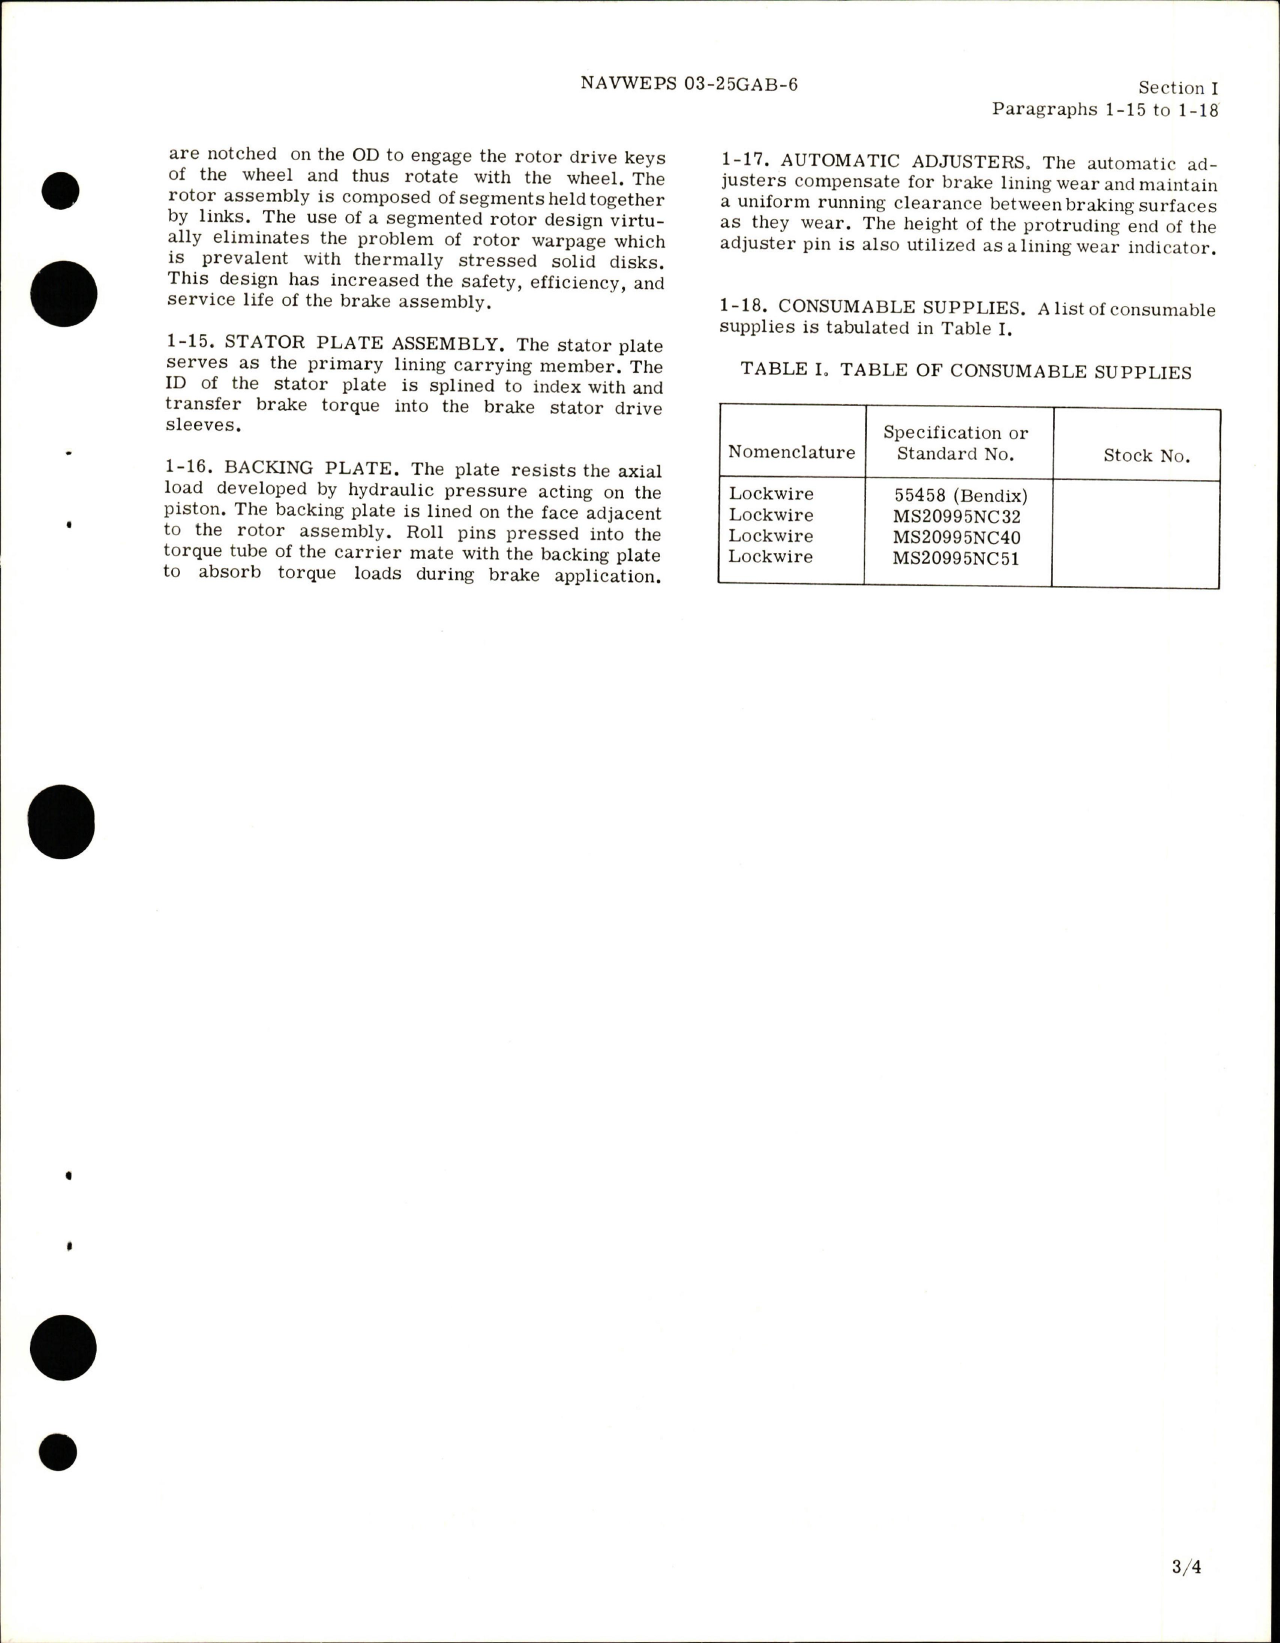 Sample page 7 from AirCorps Library document: Operation and Maintenance Instructions for Main Landing Gear Brake Assembly